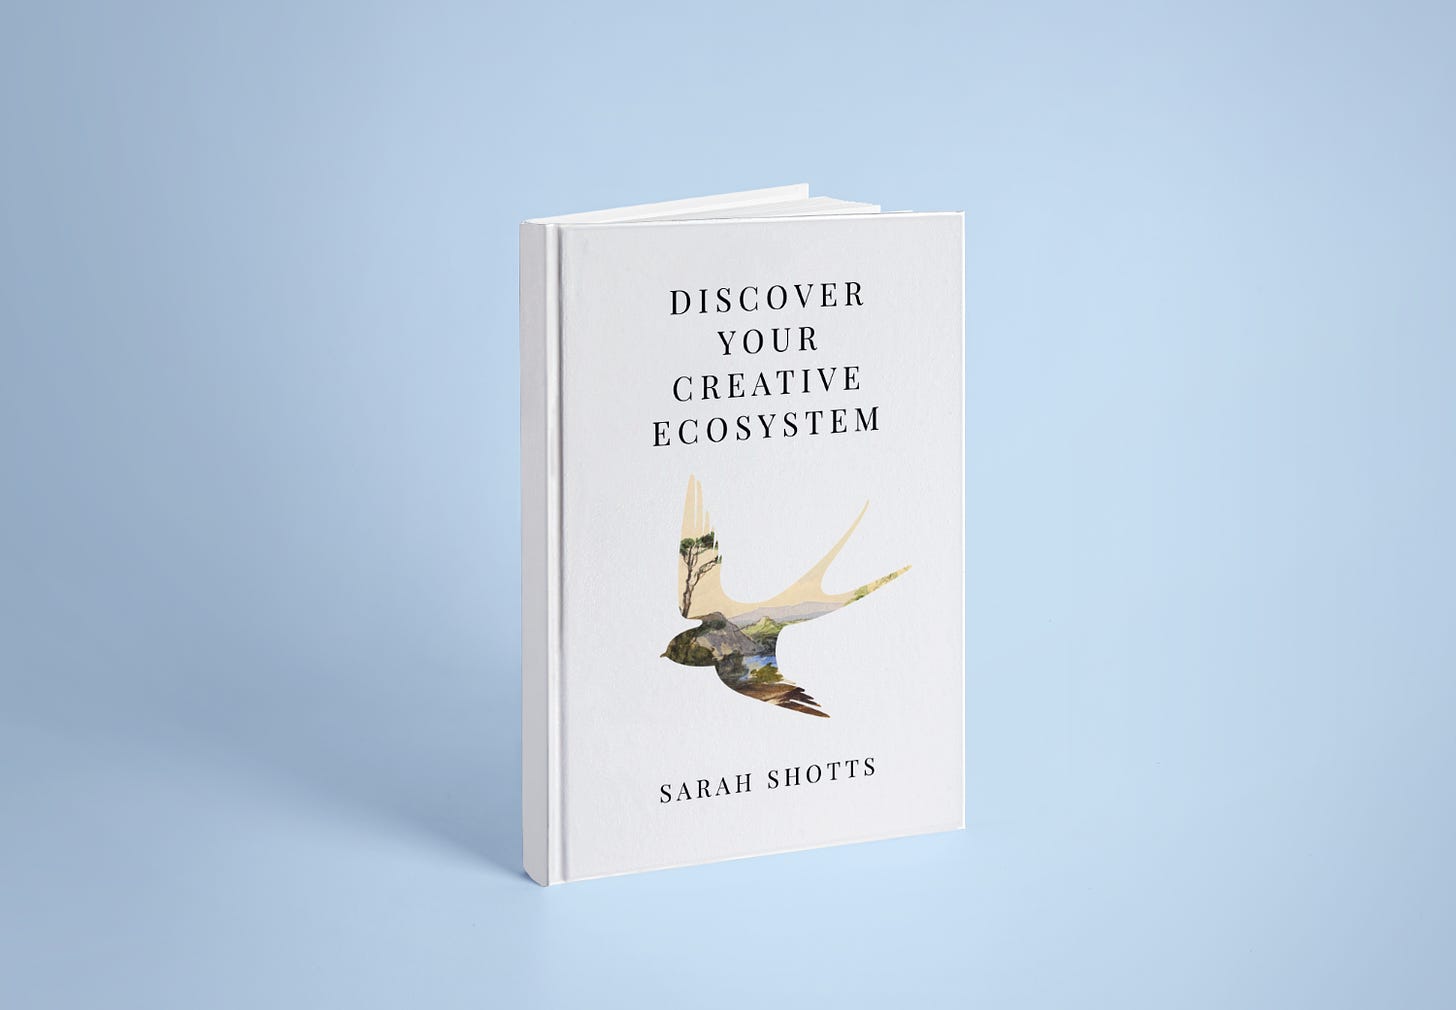 Discover Your Creative Ecosystem by Sarah Shotts in white hardcover form with a bird silhouetting a mountainous landscape in watercolor